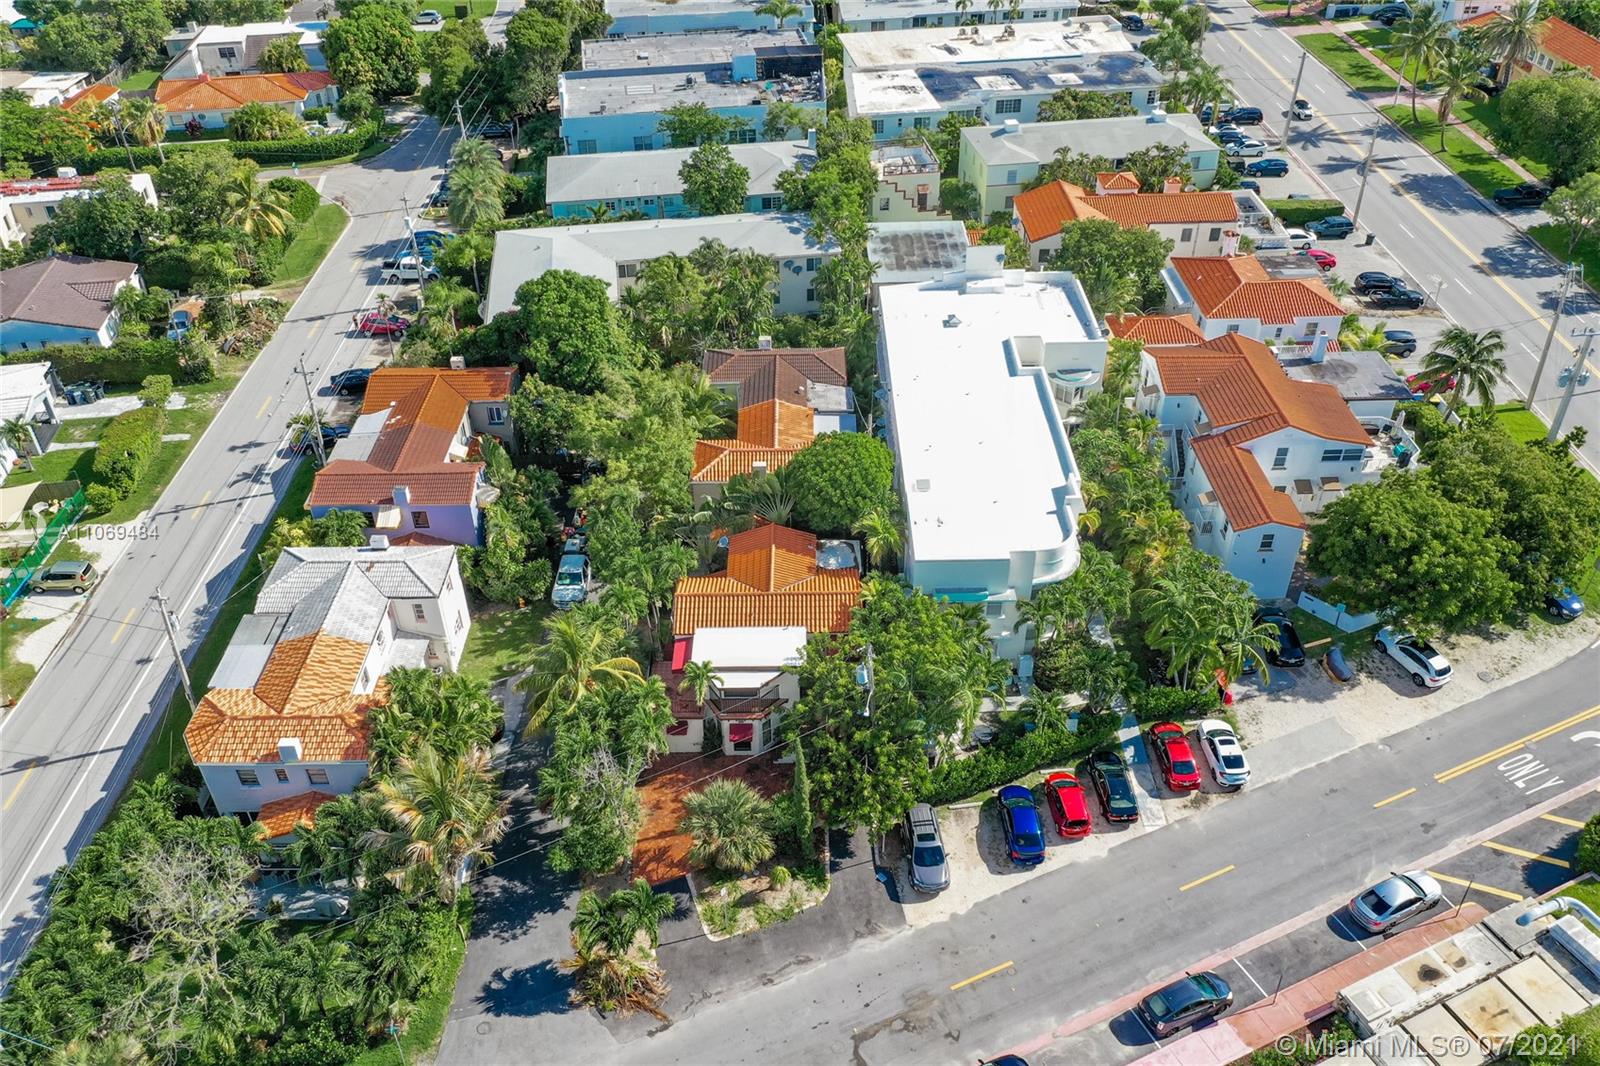 an aerial view of residential houses with outdoor space and street view